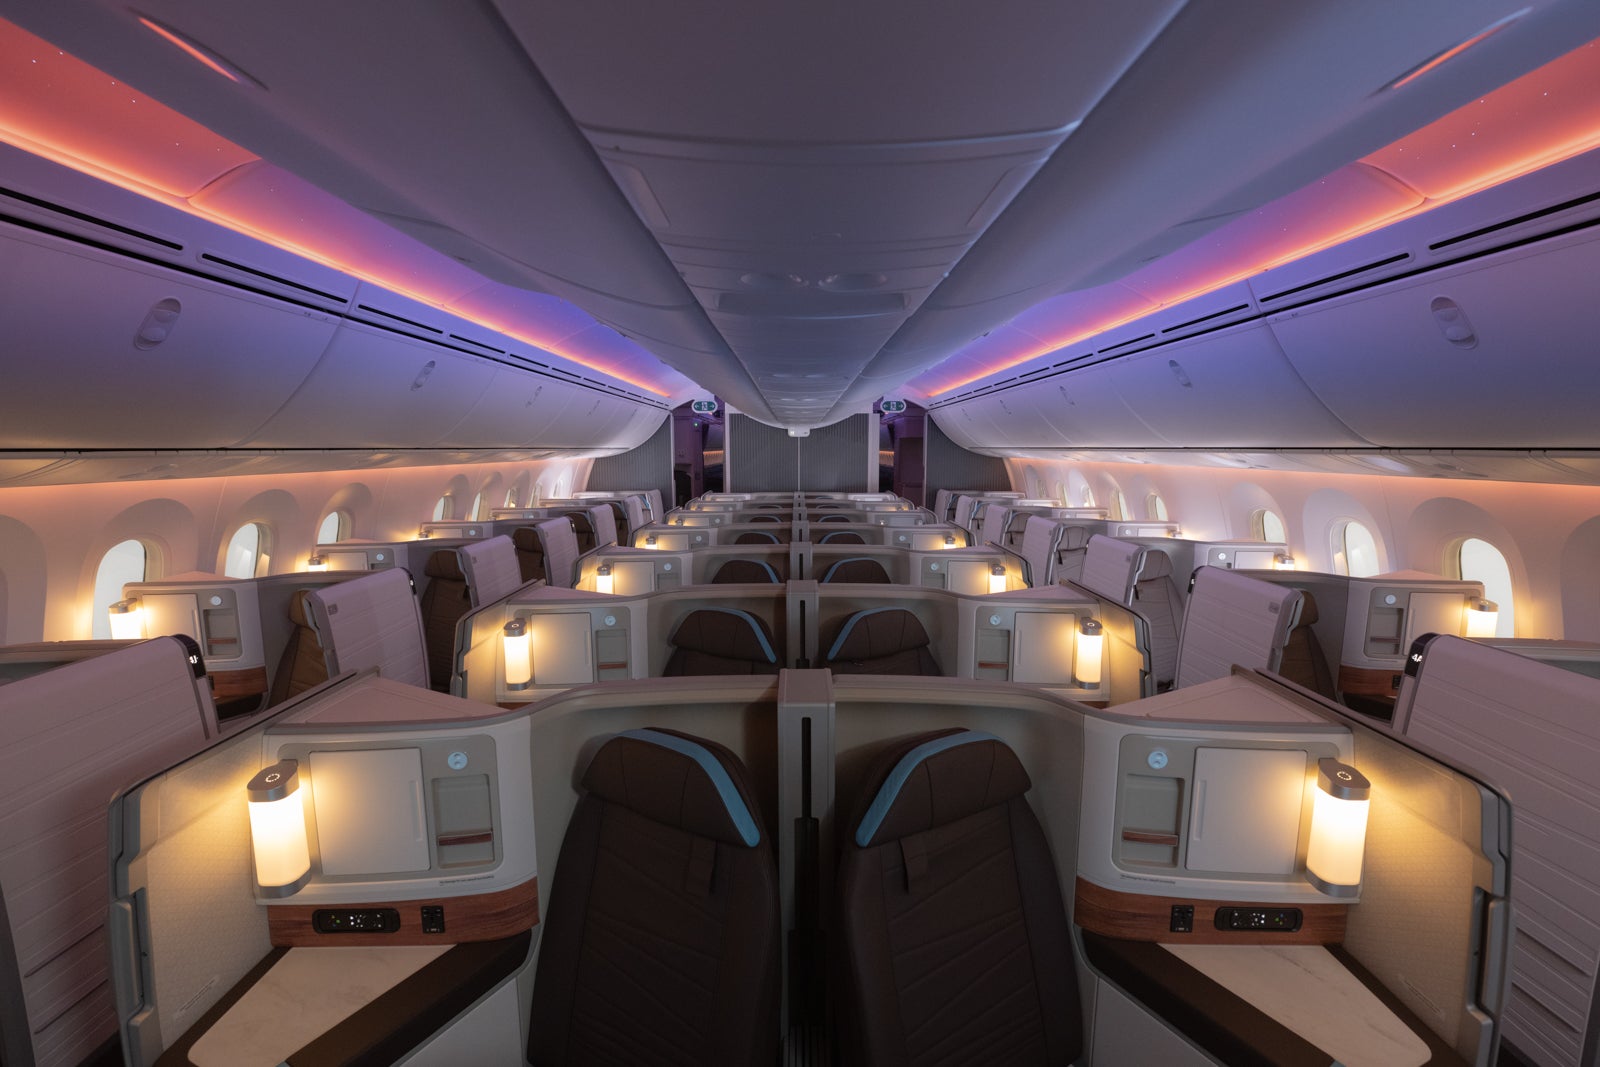 Hawaiian Airways unveils beautiful business-class, economic system cabins on the brand new Boeing 787 Dreamliner